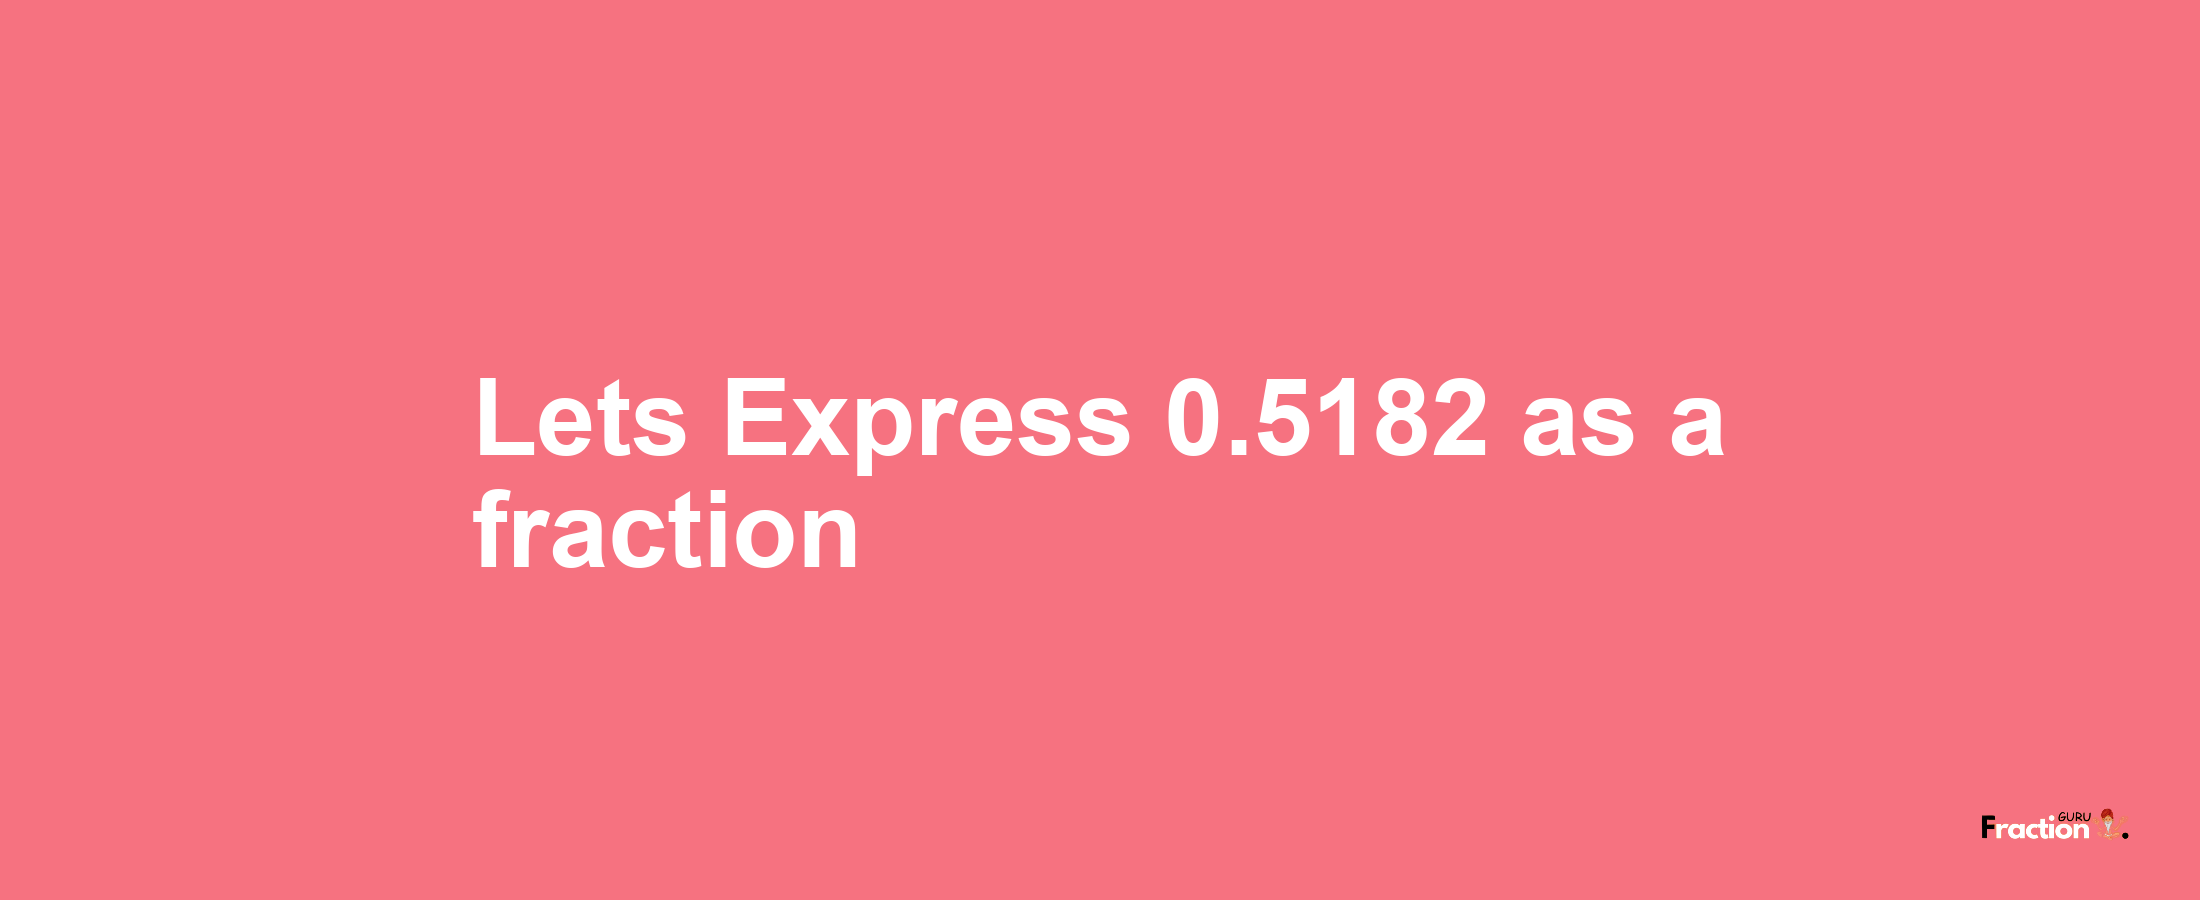 Lets Express 0.5182 as afraction